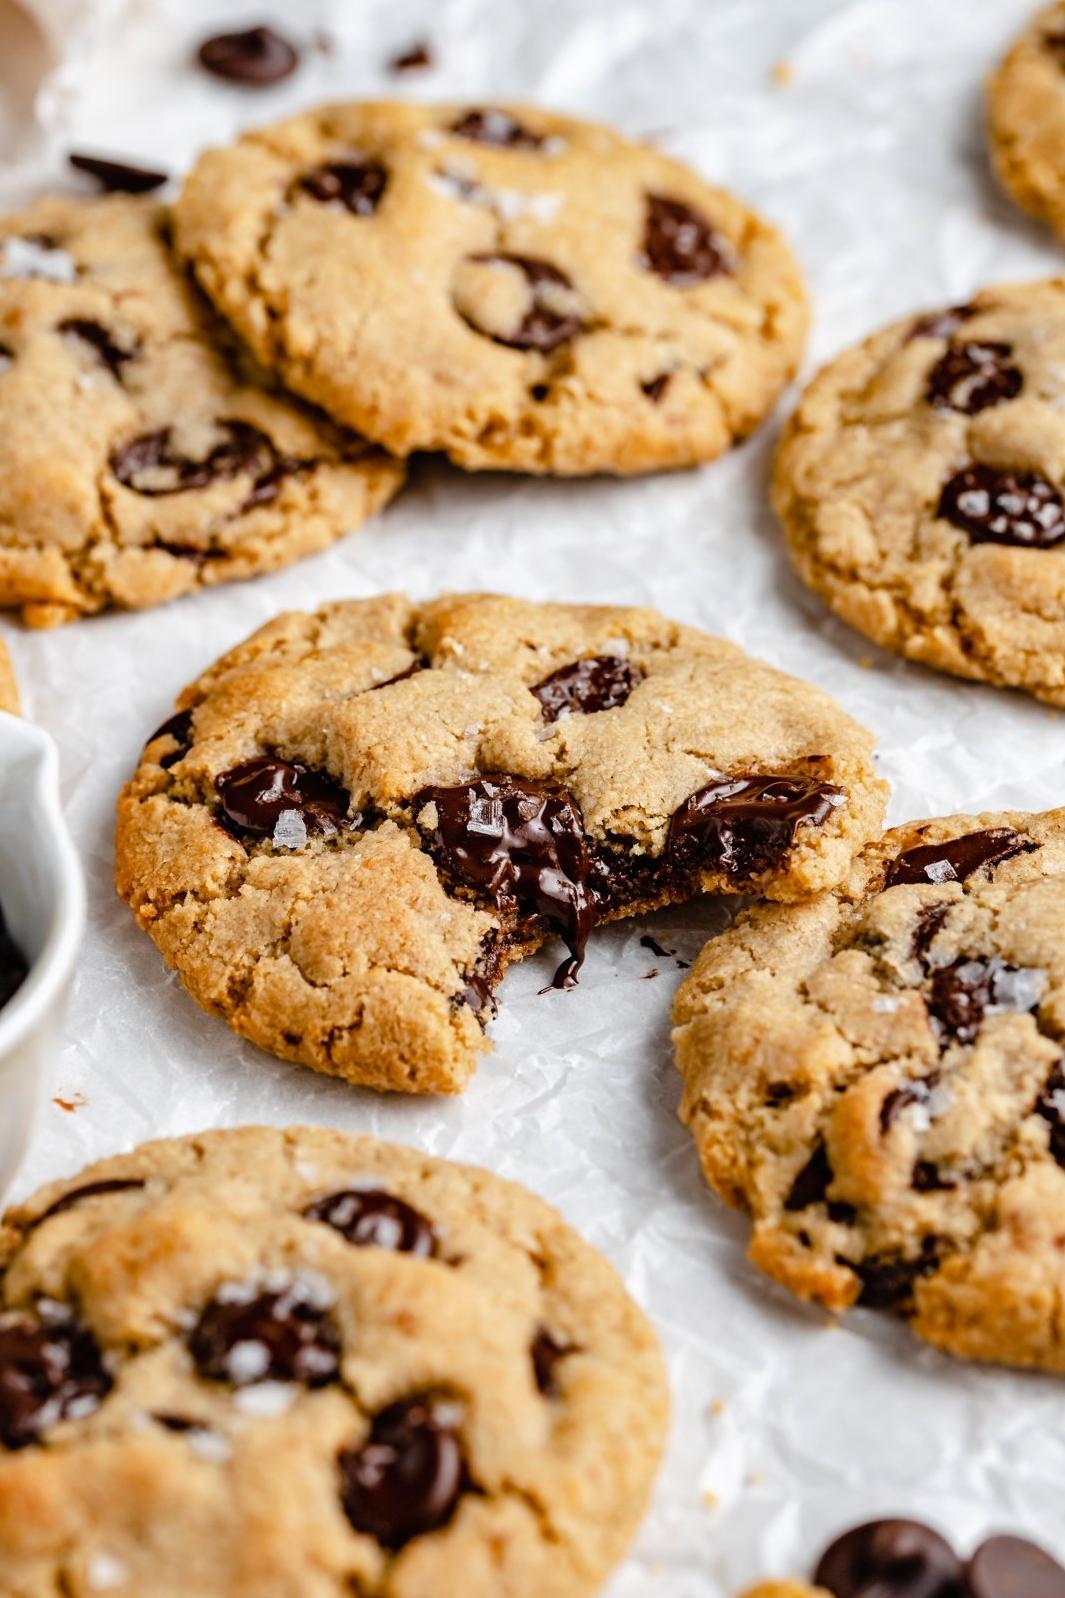  Get ready to indulge in these mouth-watering vegan chocolate chip cookies!